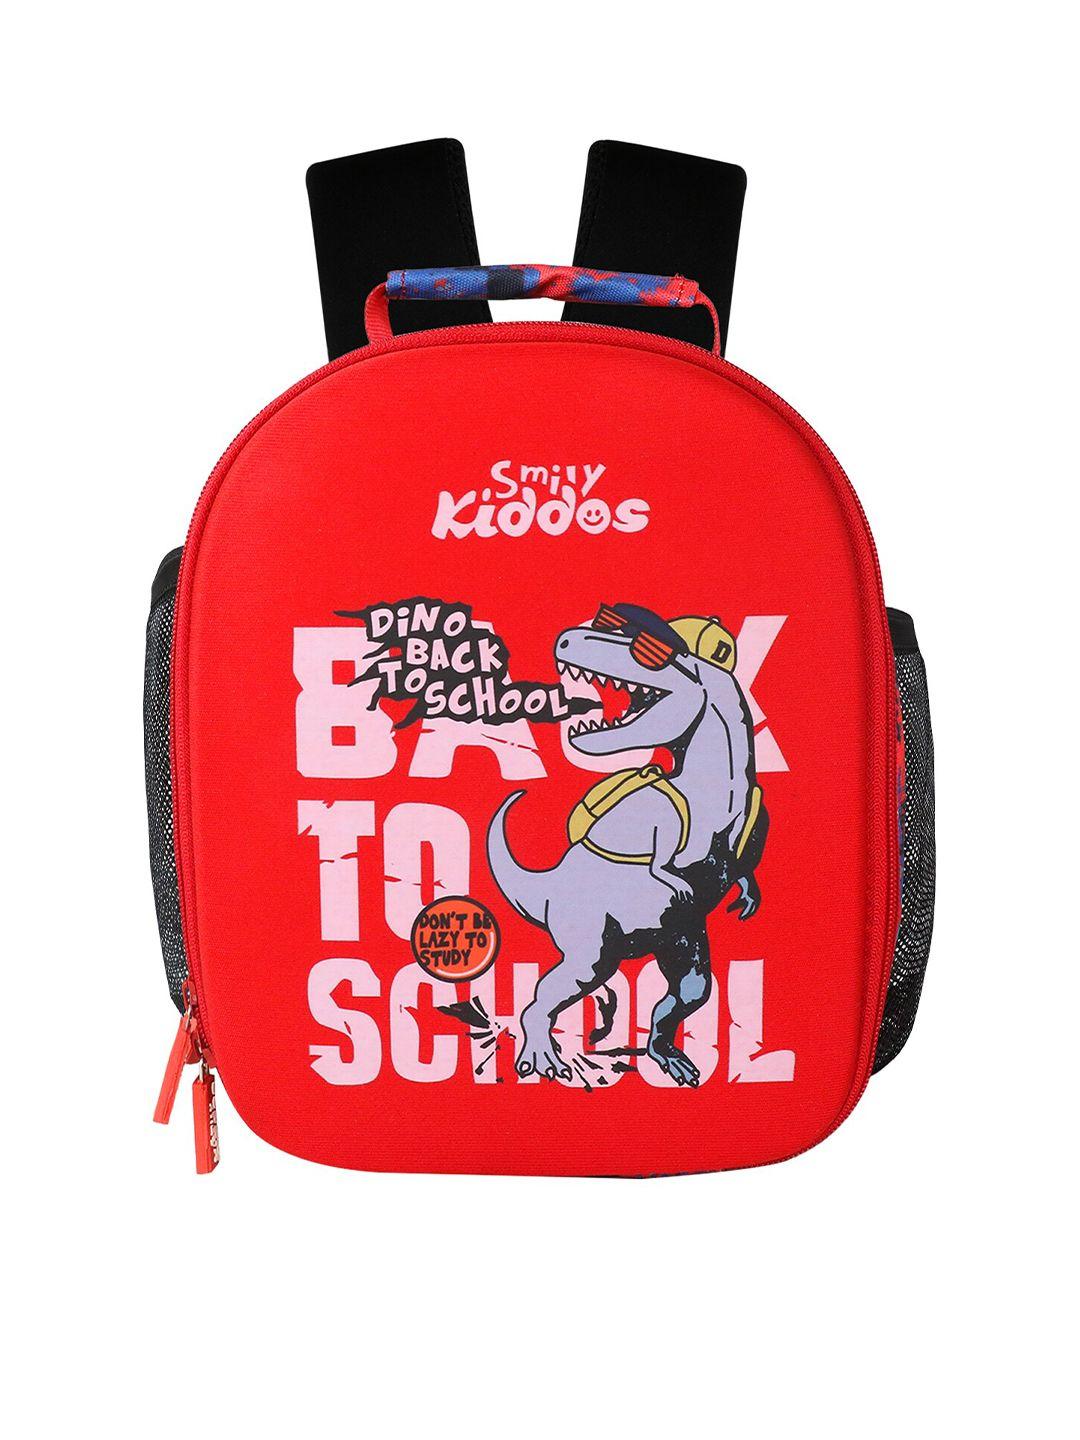 smily kiddos kids red & grey graphic printed backpack with compression straps